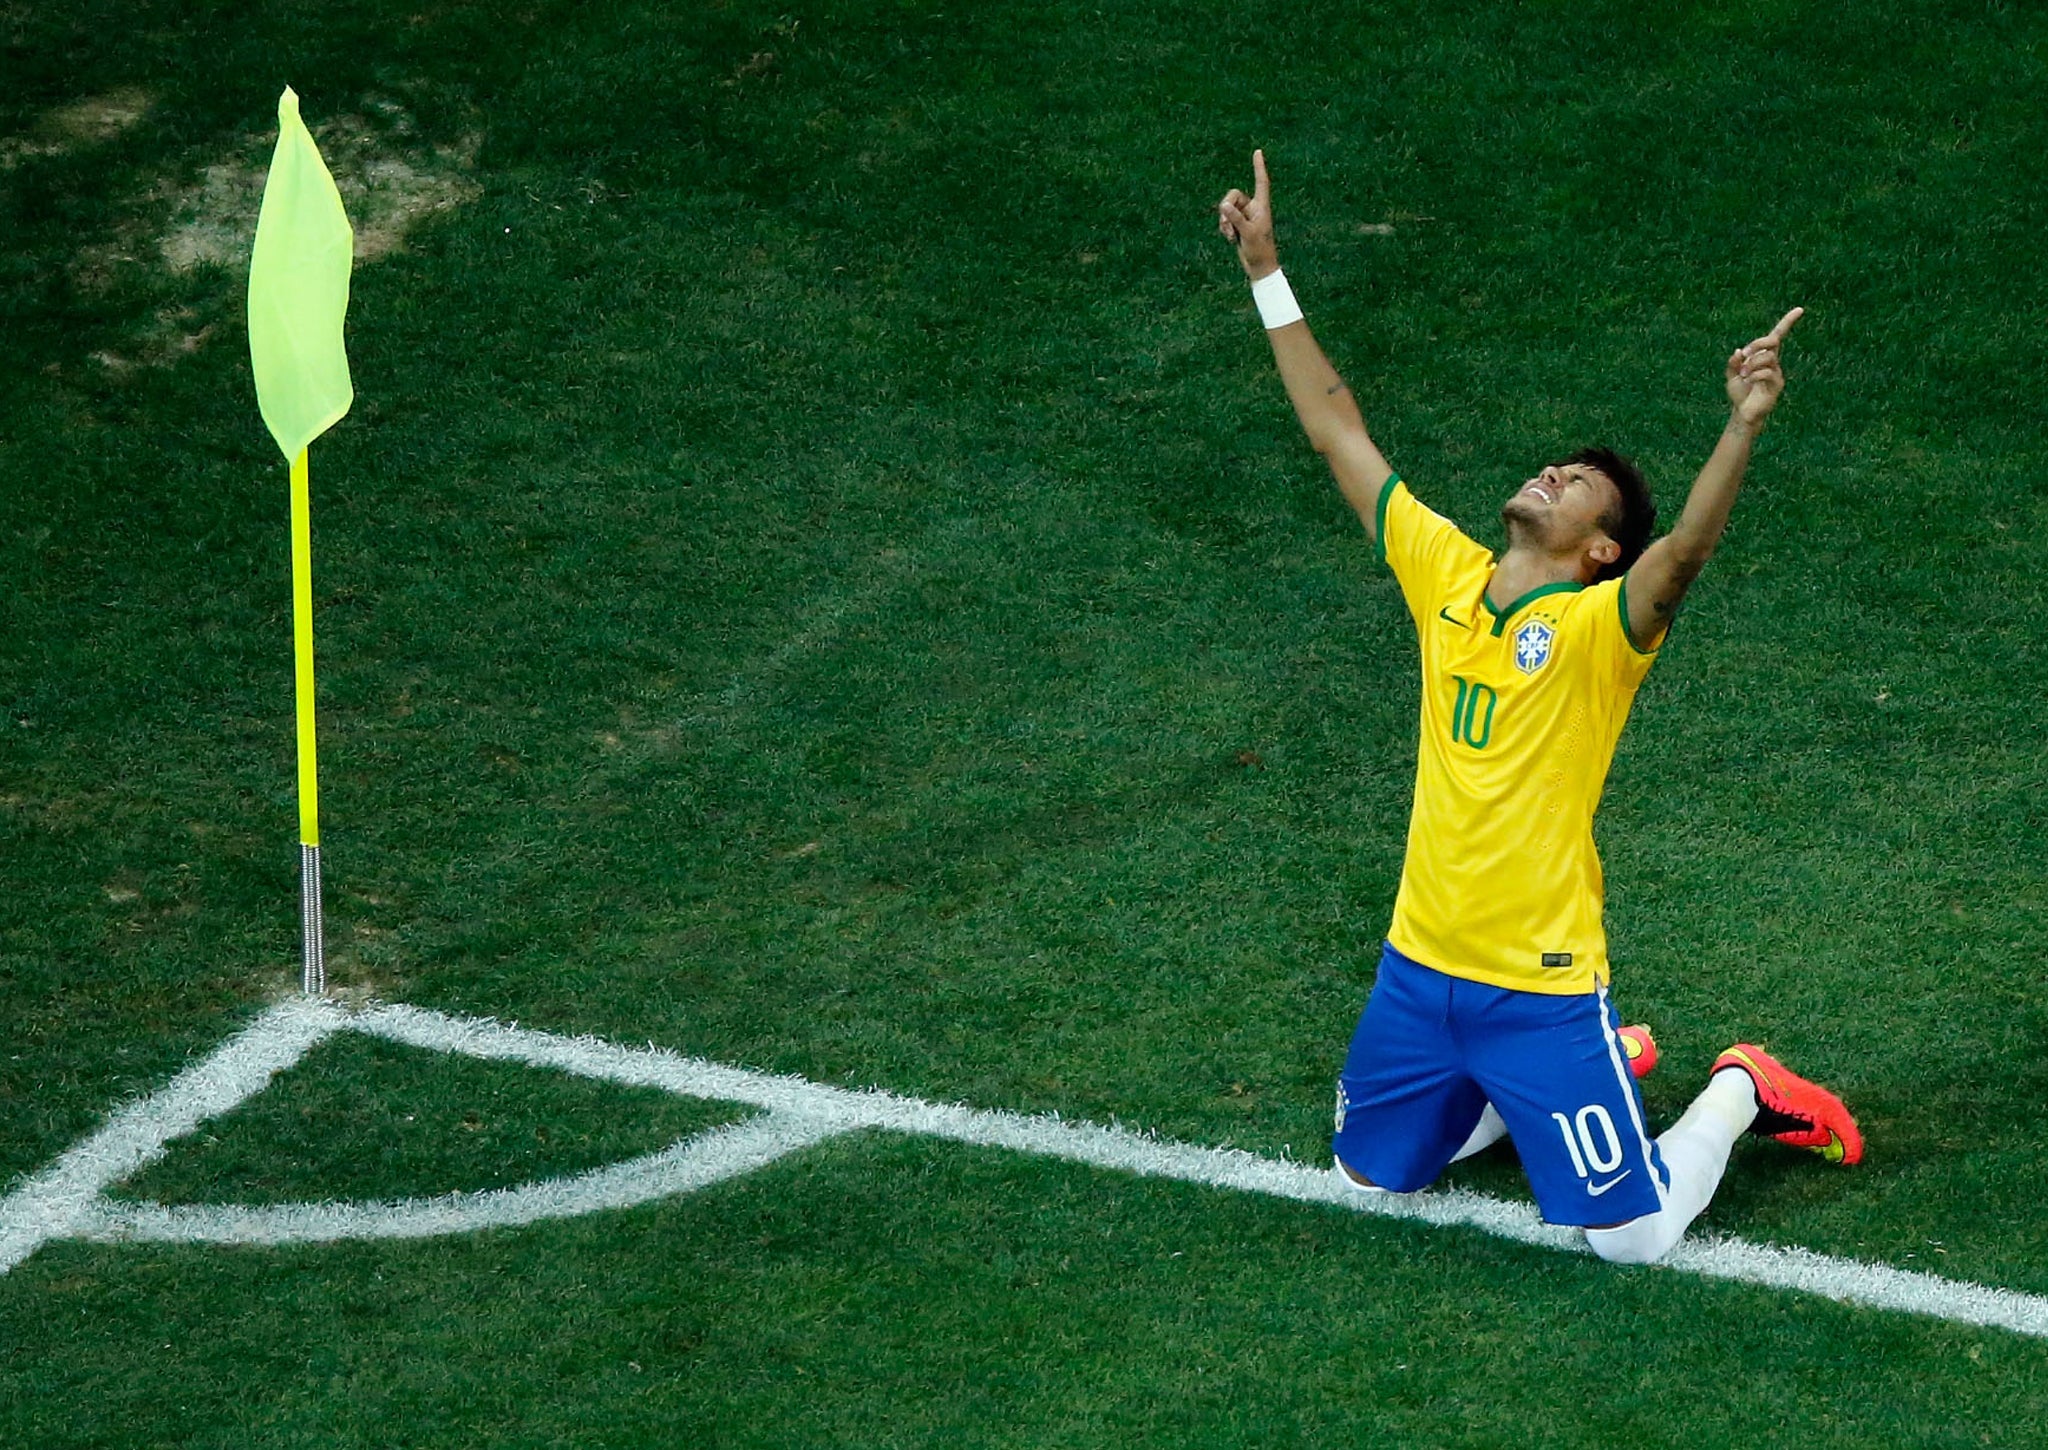 Neymar celebrates scoring his second goal against Croatia in the opening game of the World Cup 2014